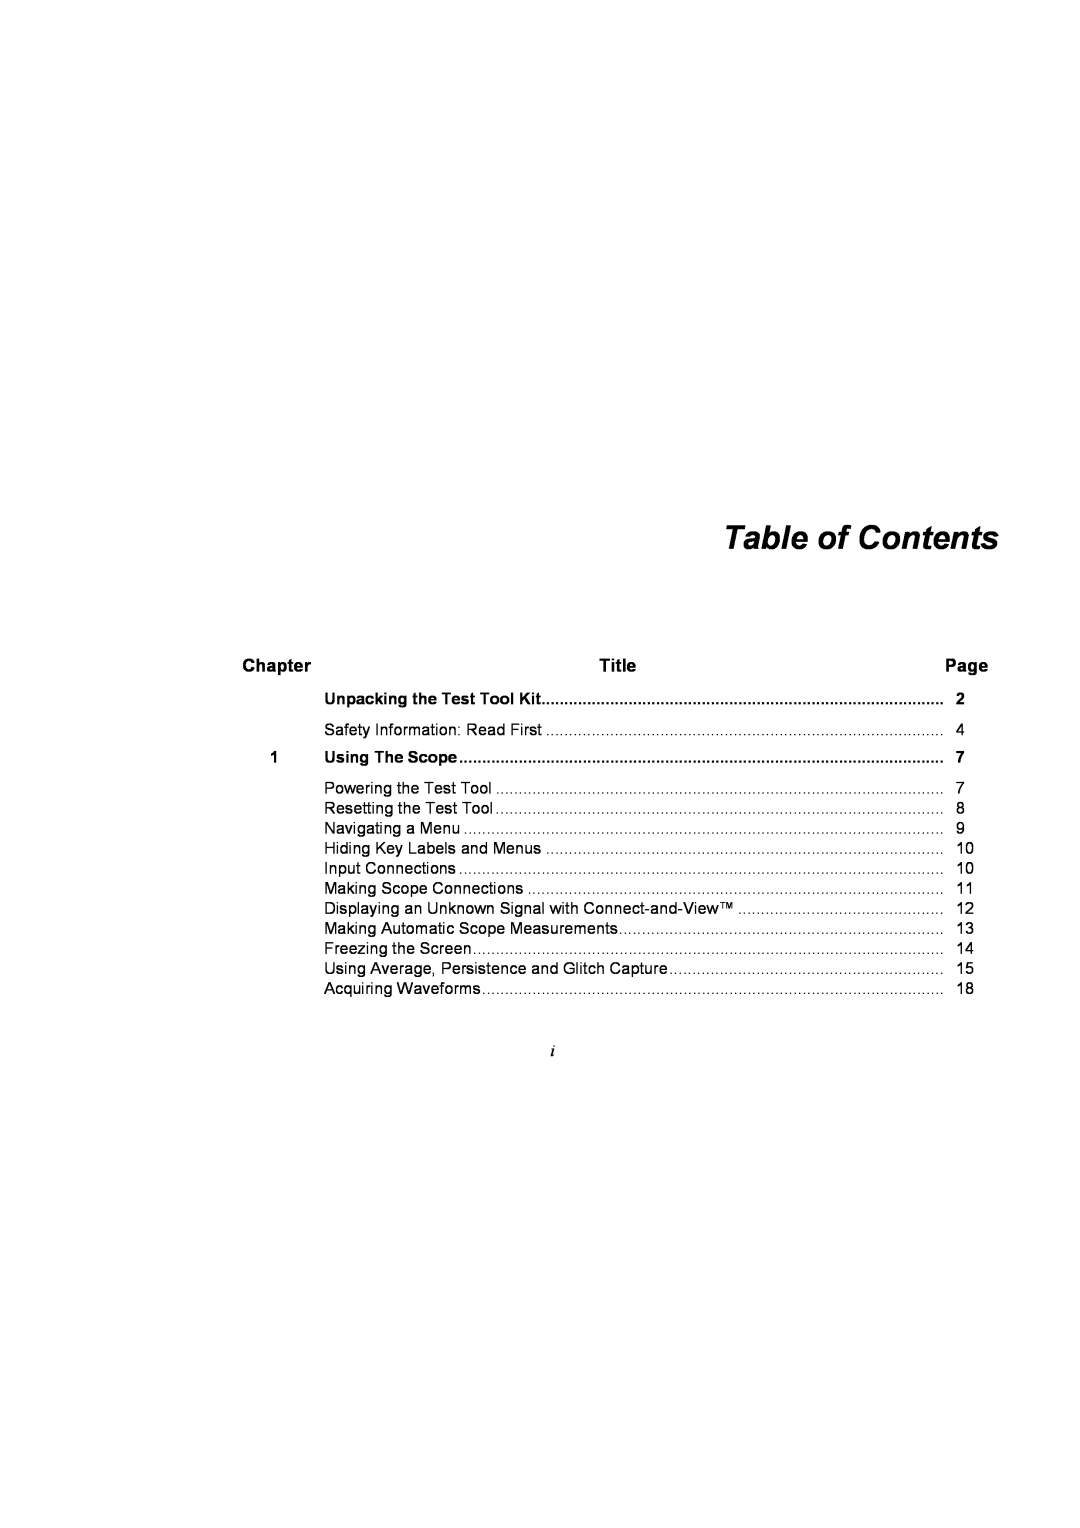 Fluke 196C user manual Table of Contents, Chapter, Title, Page, Unpacking the Test Tool Kit, Using The Scope 